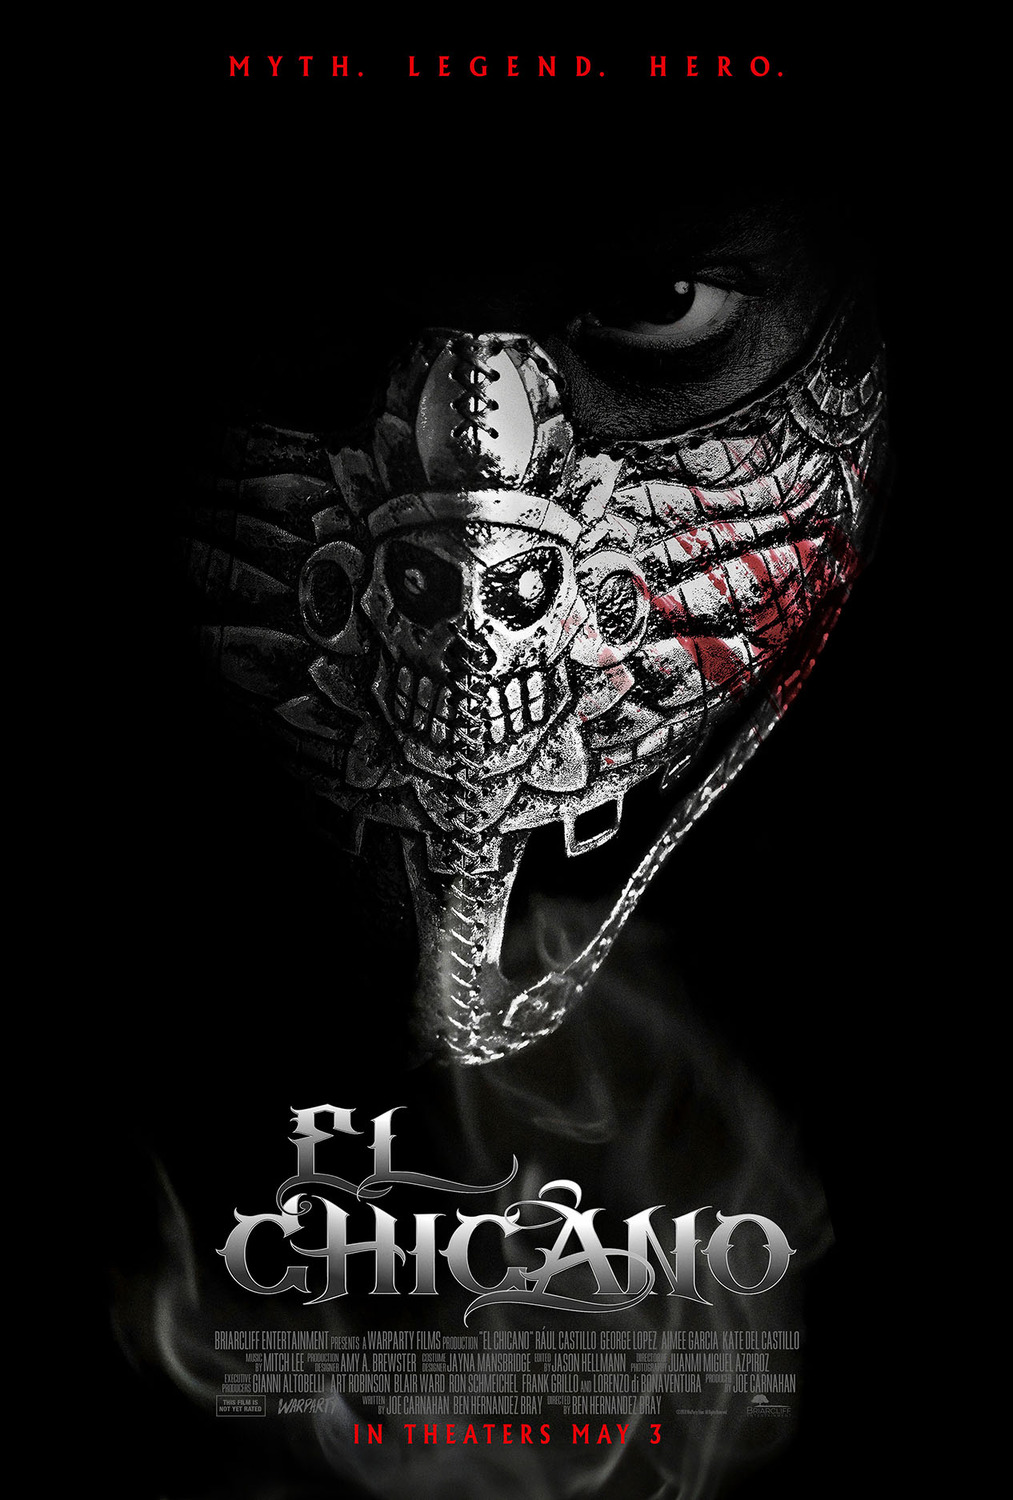 Extra Large Movie Poster Image for El Chicano 